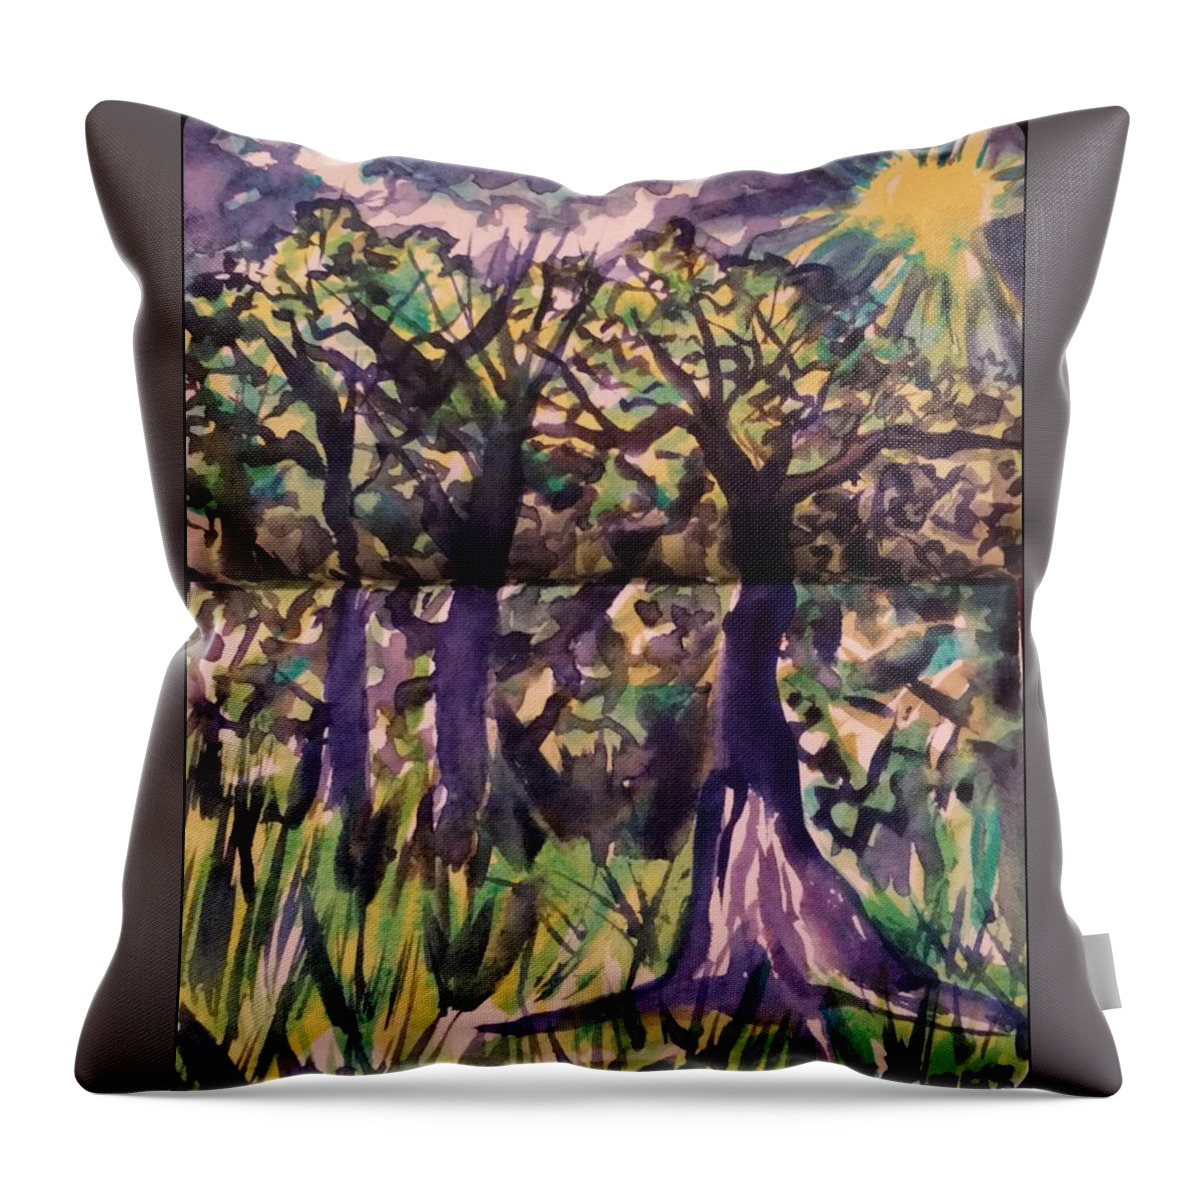 Grove Throw Pillow featuring the painting Grove by Angela Weddle